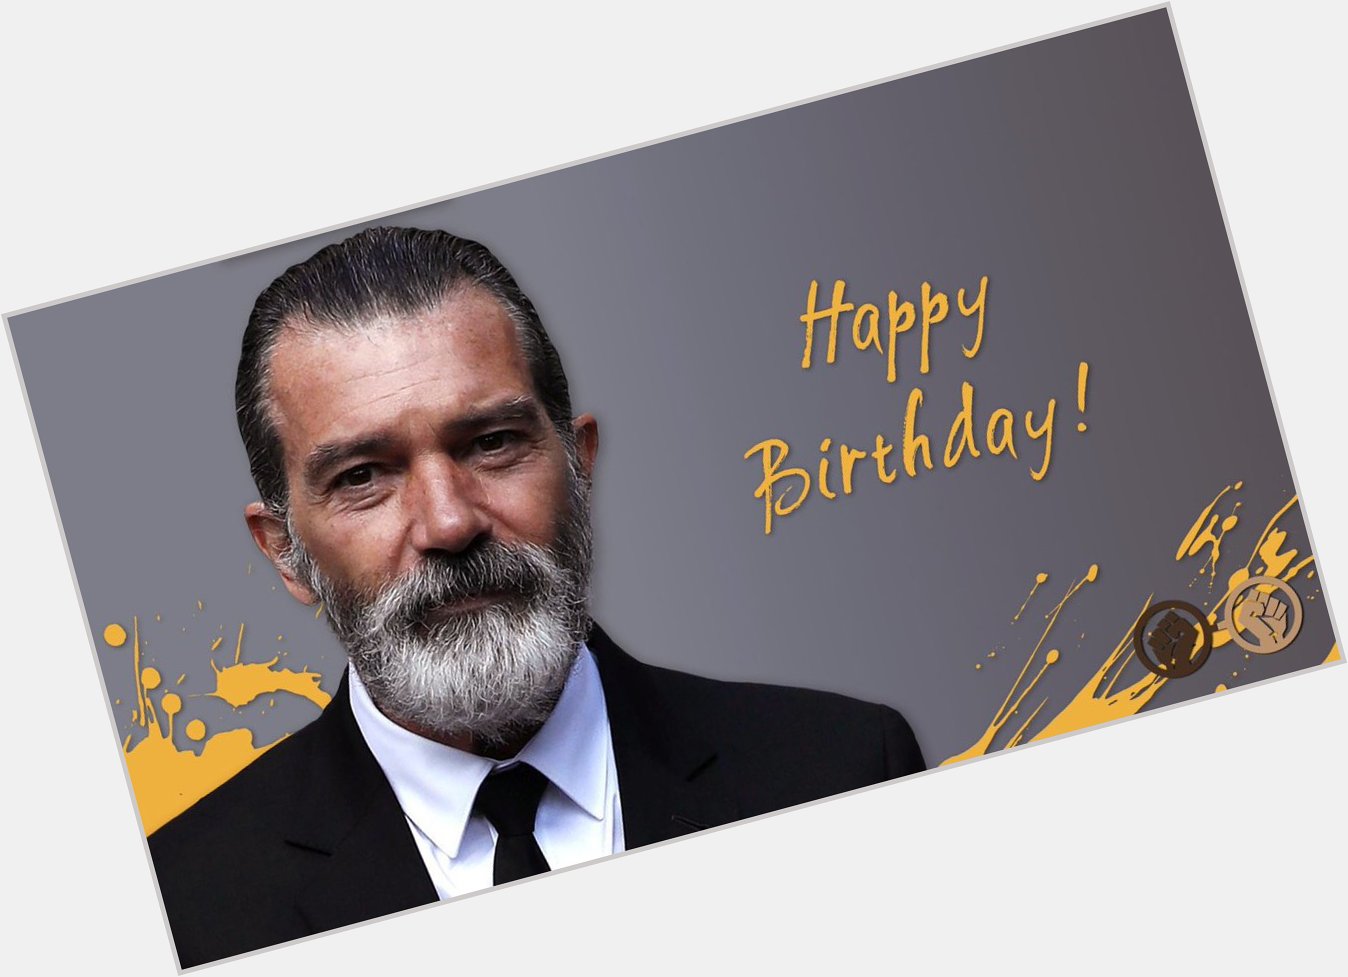 Happy birthday, Antonio Banderas! The talented actor turns 58 today. We hope he\s having a great day! 